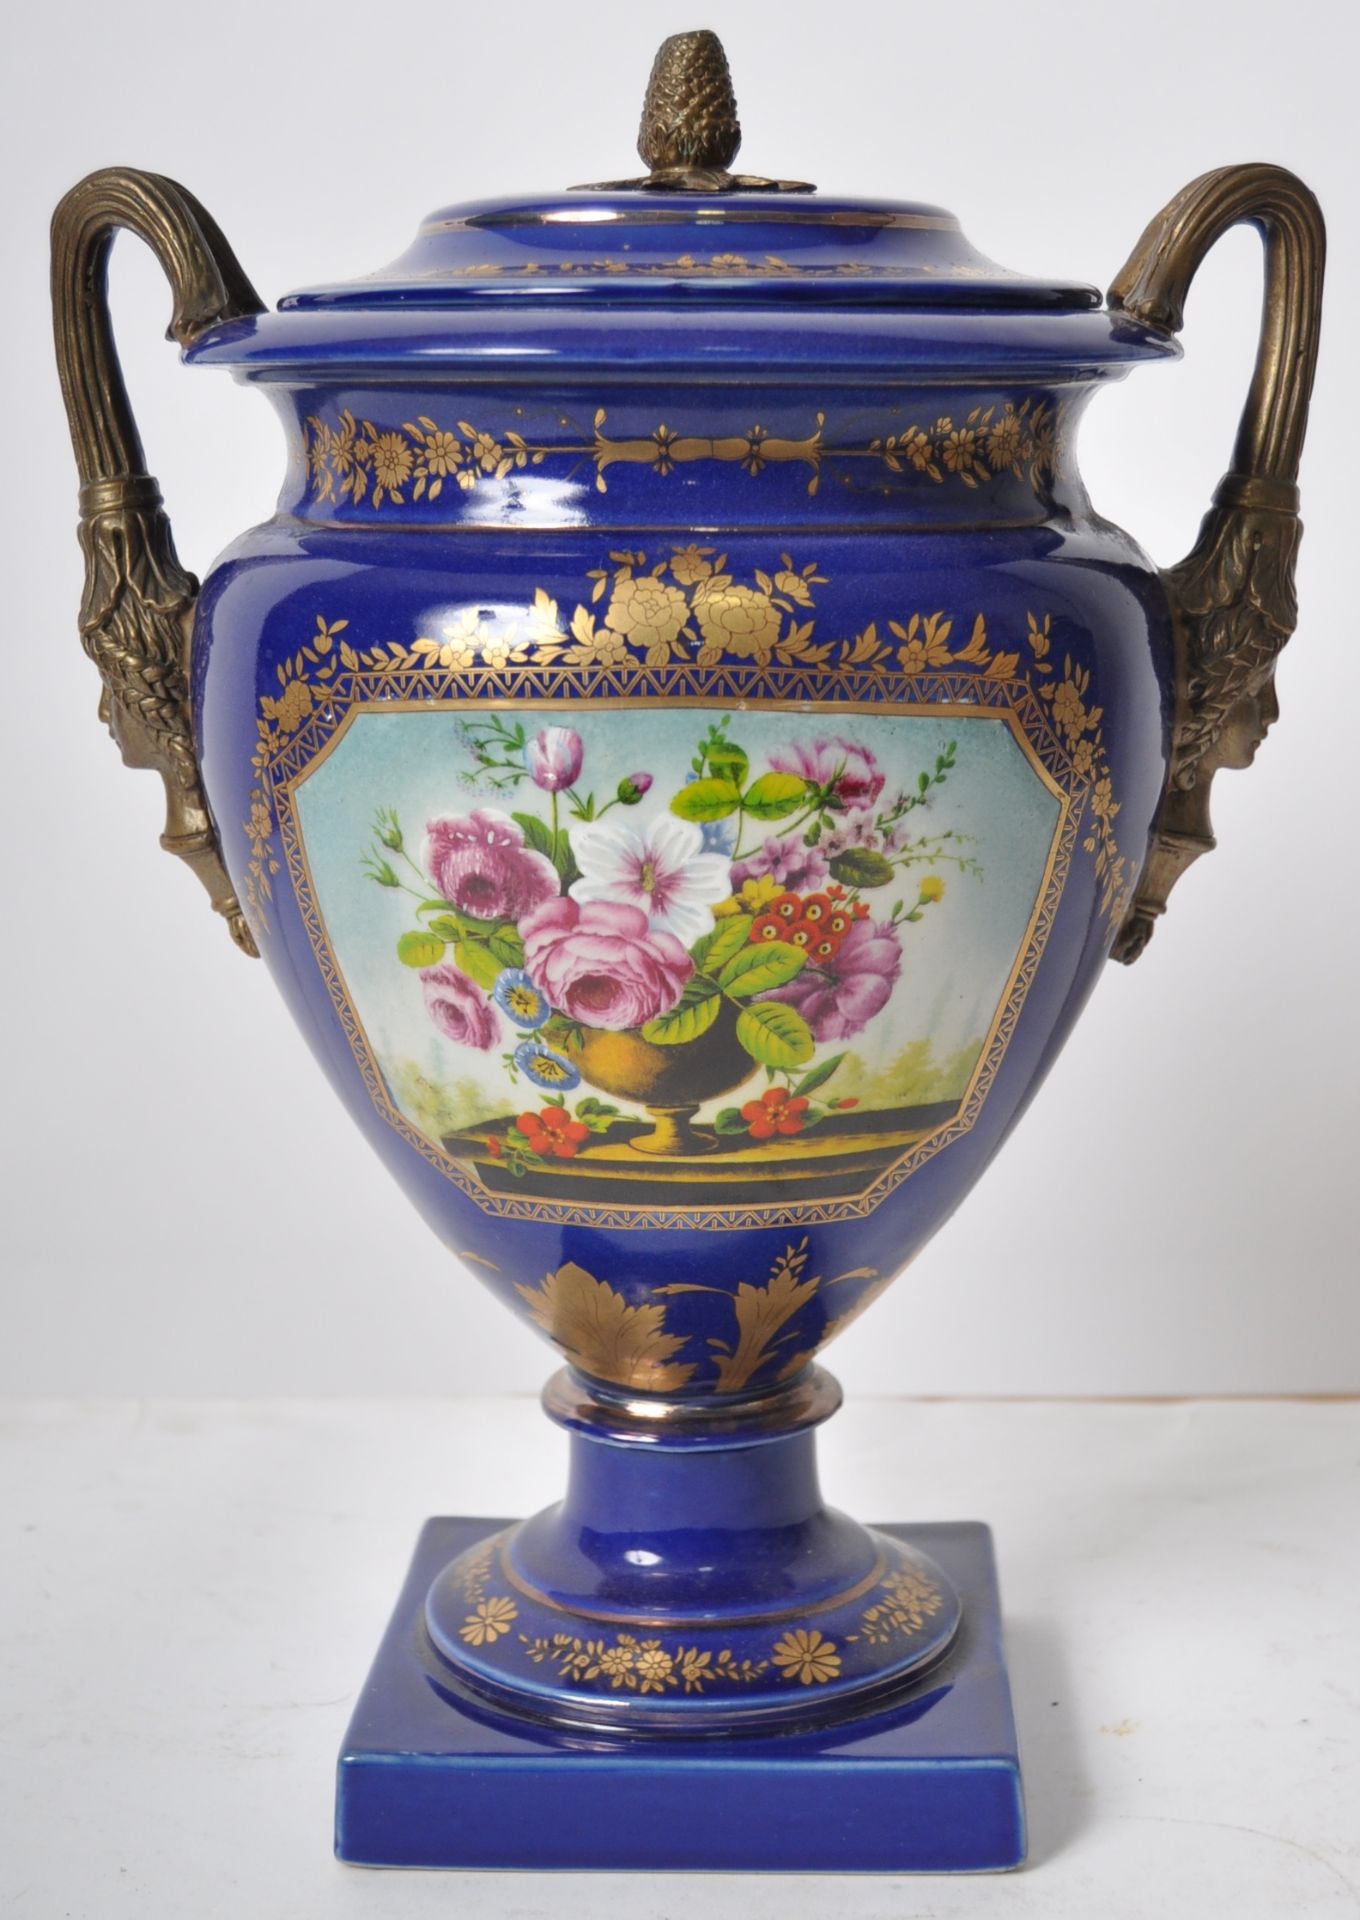 EARLY 20TH CENTURY PORCELAIN LIDDED URN - Image 2 of 11